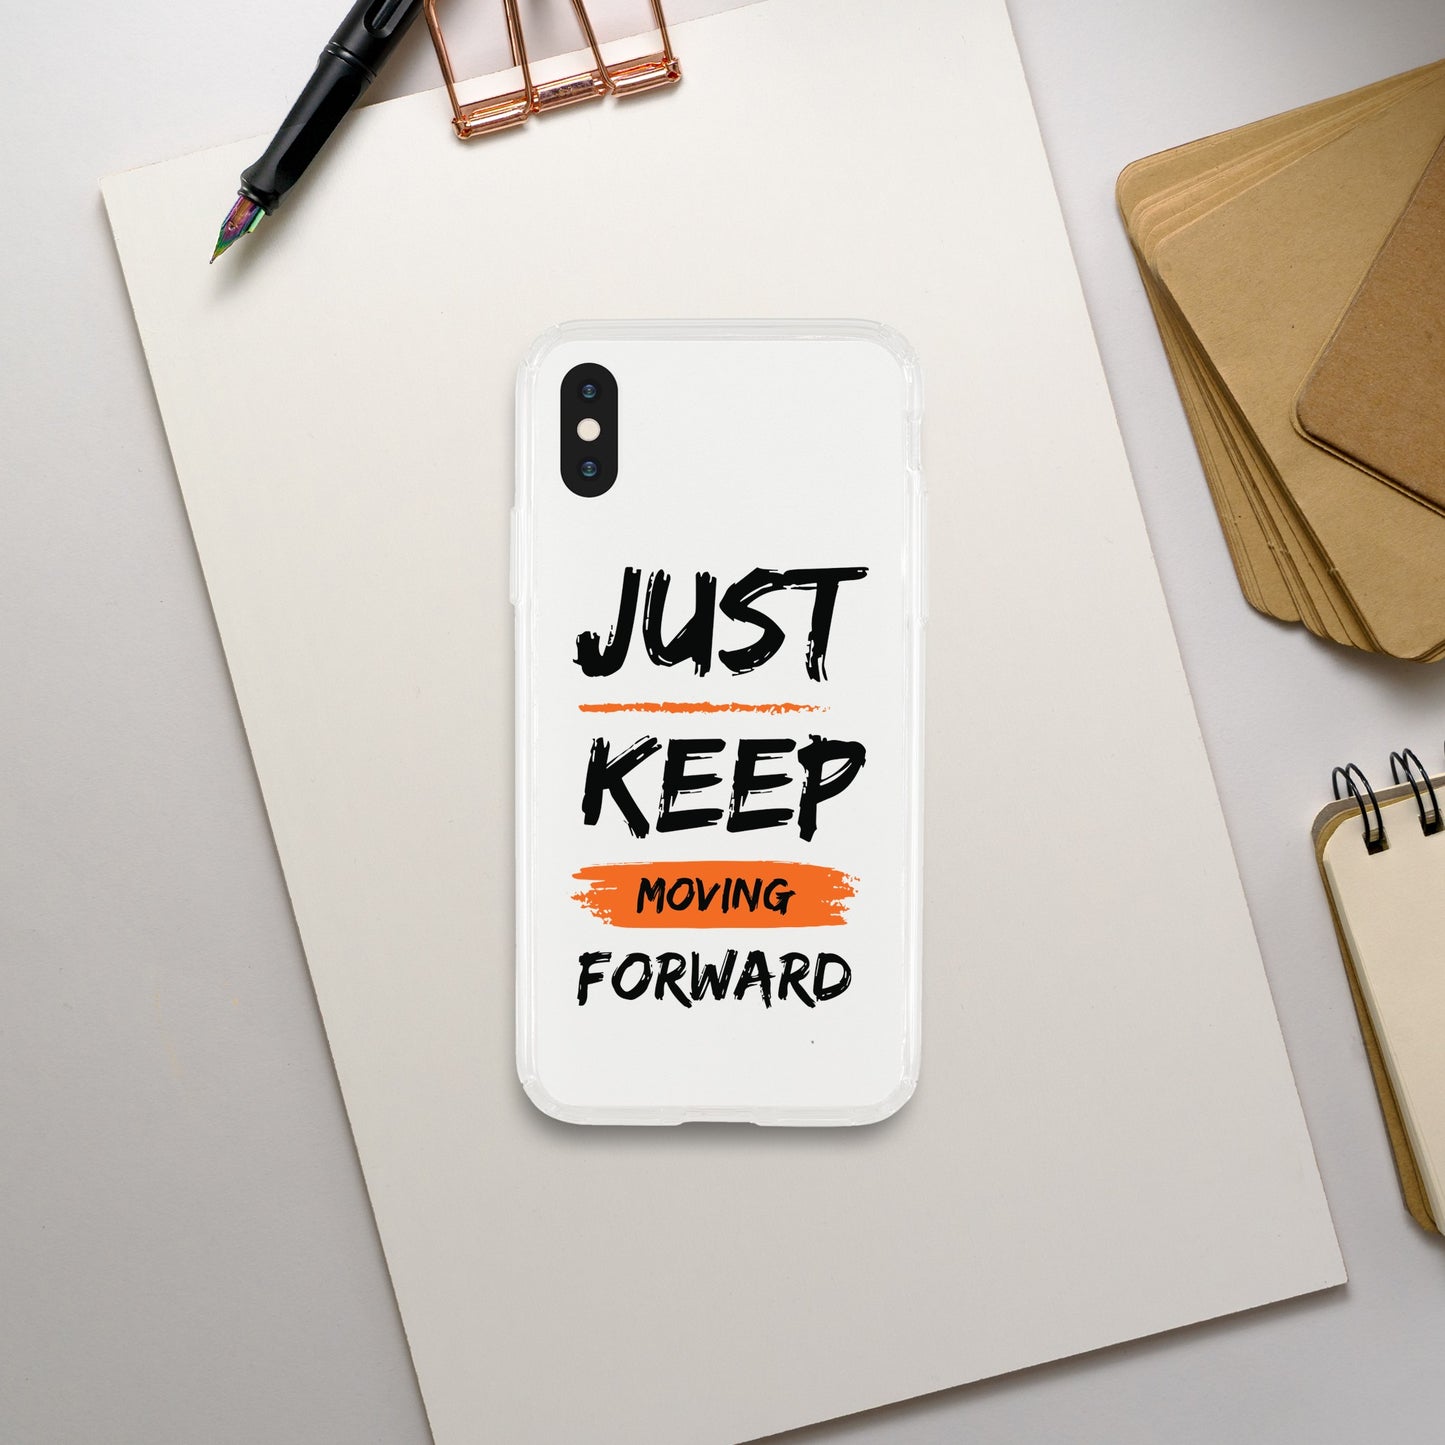 Just Keep Moving Forward - Clear case